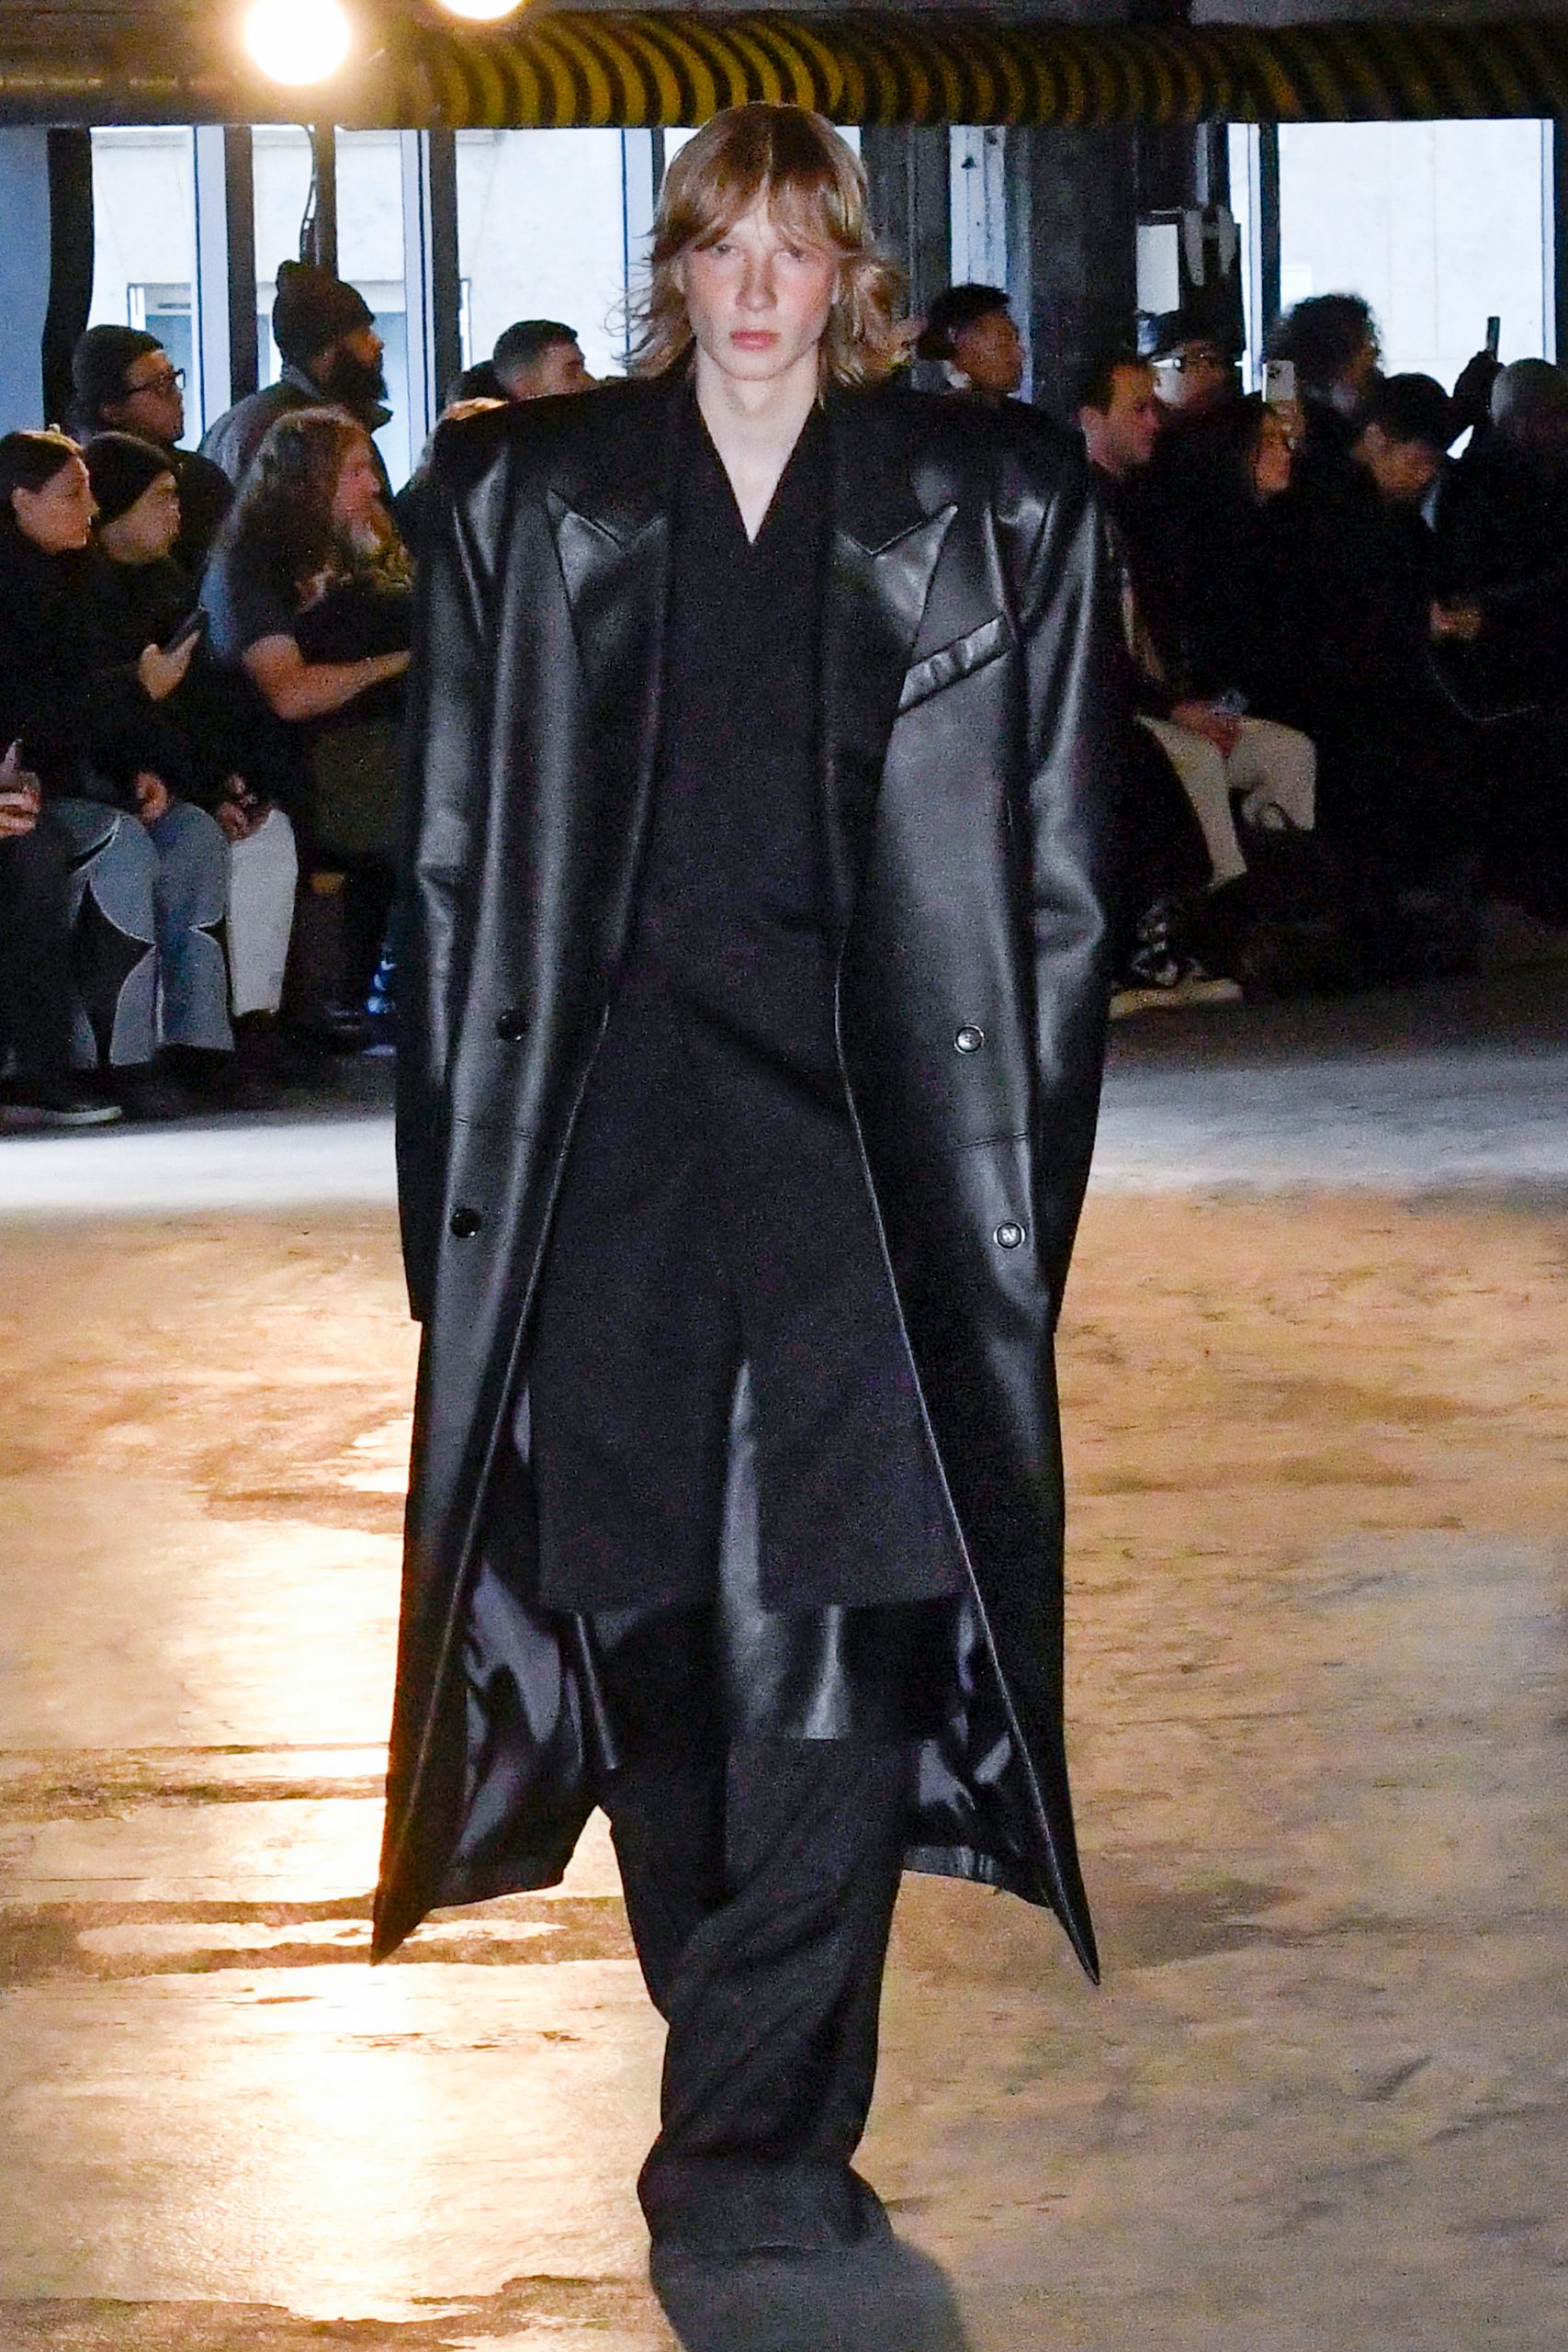 Layering different types of matte and gloss black material, this outfit reminds one of the “Matrix” movie series.